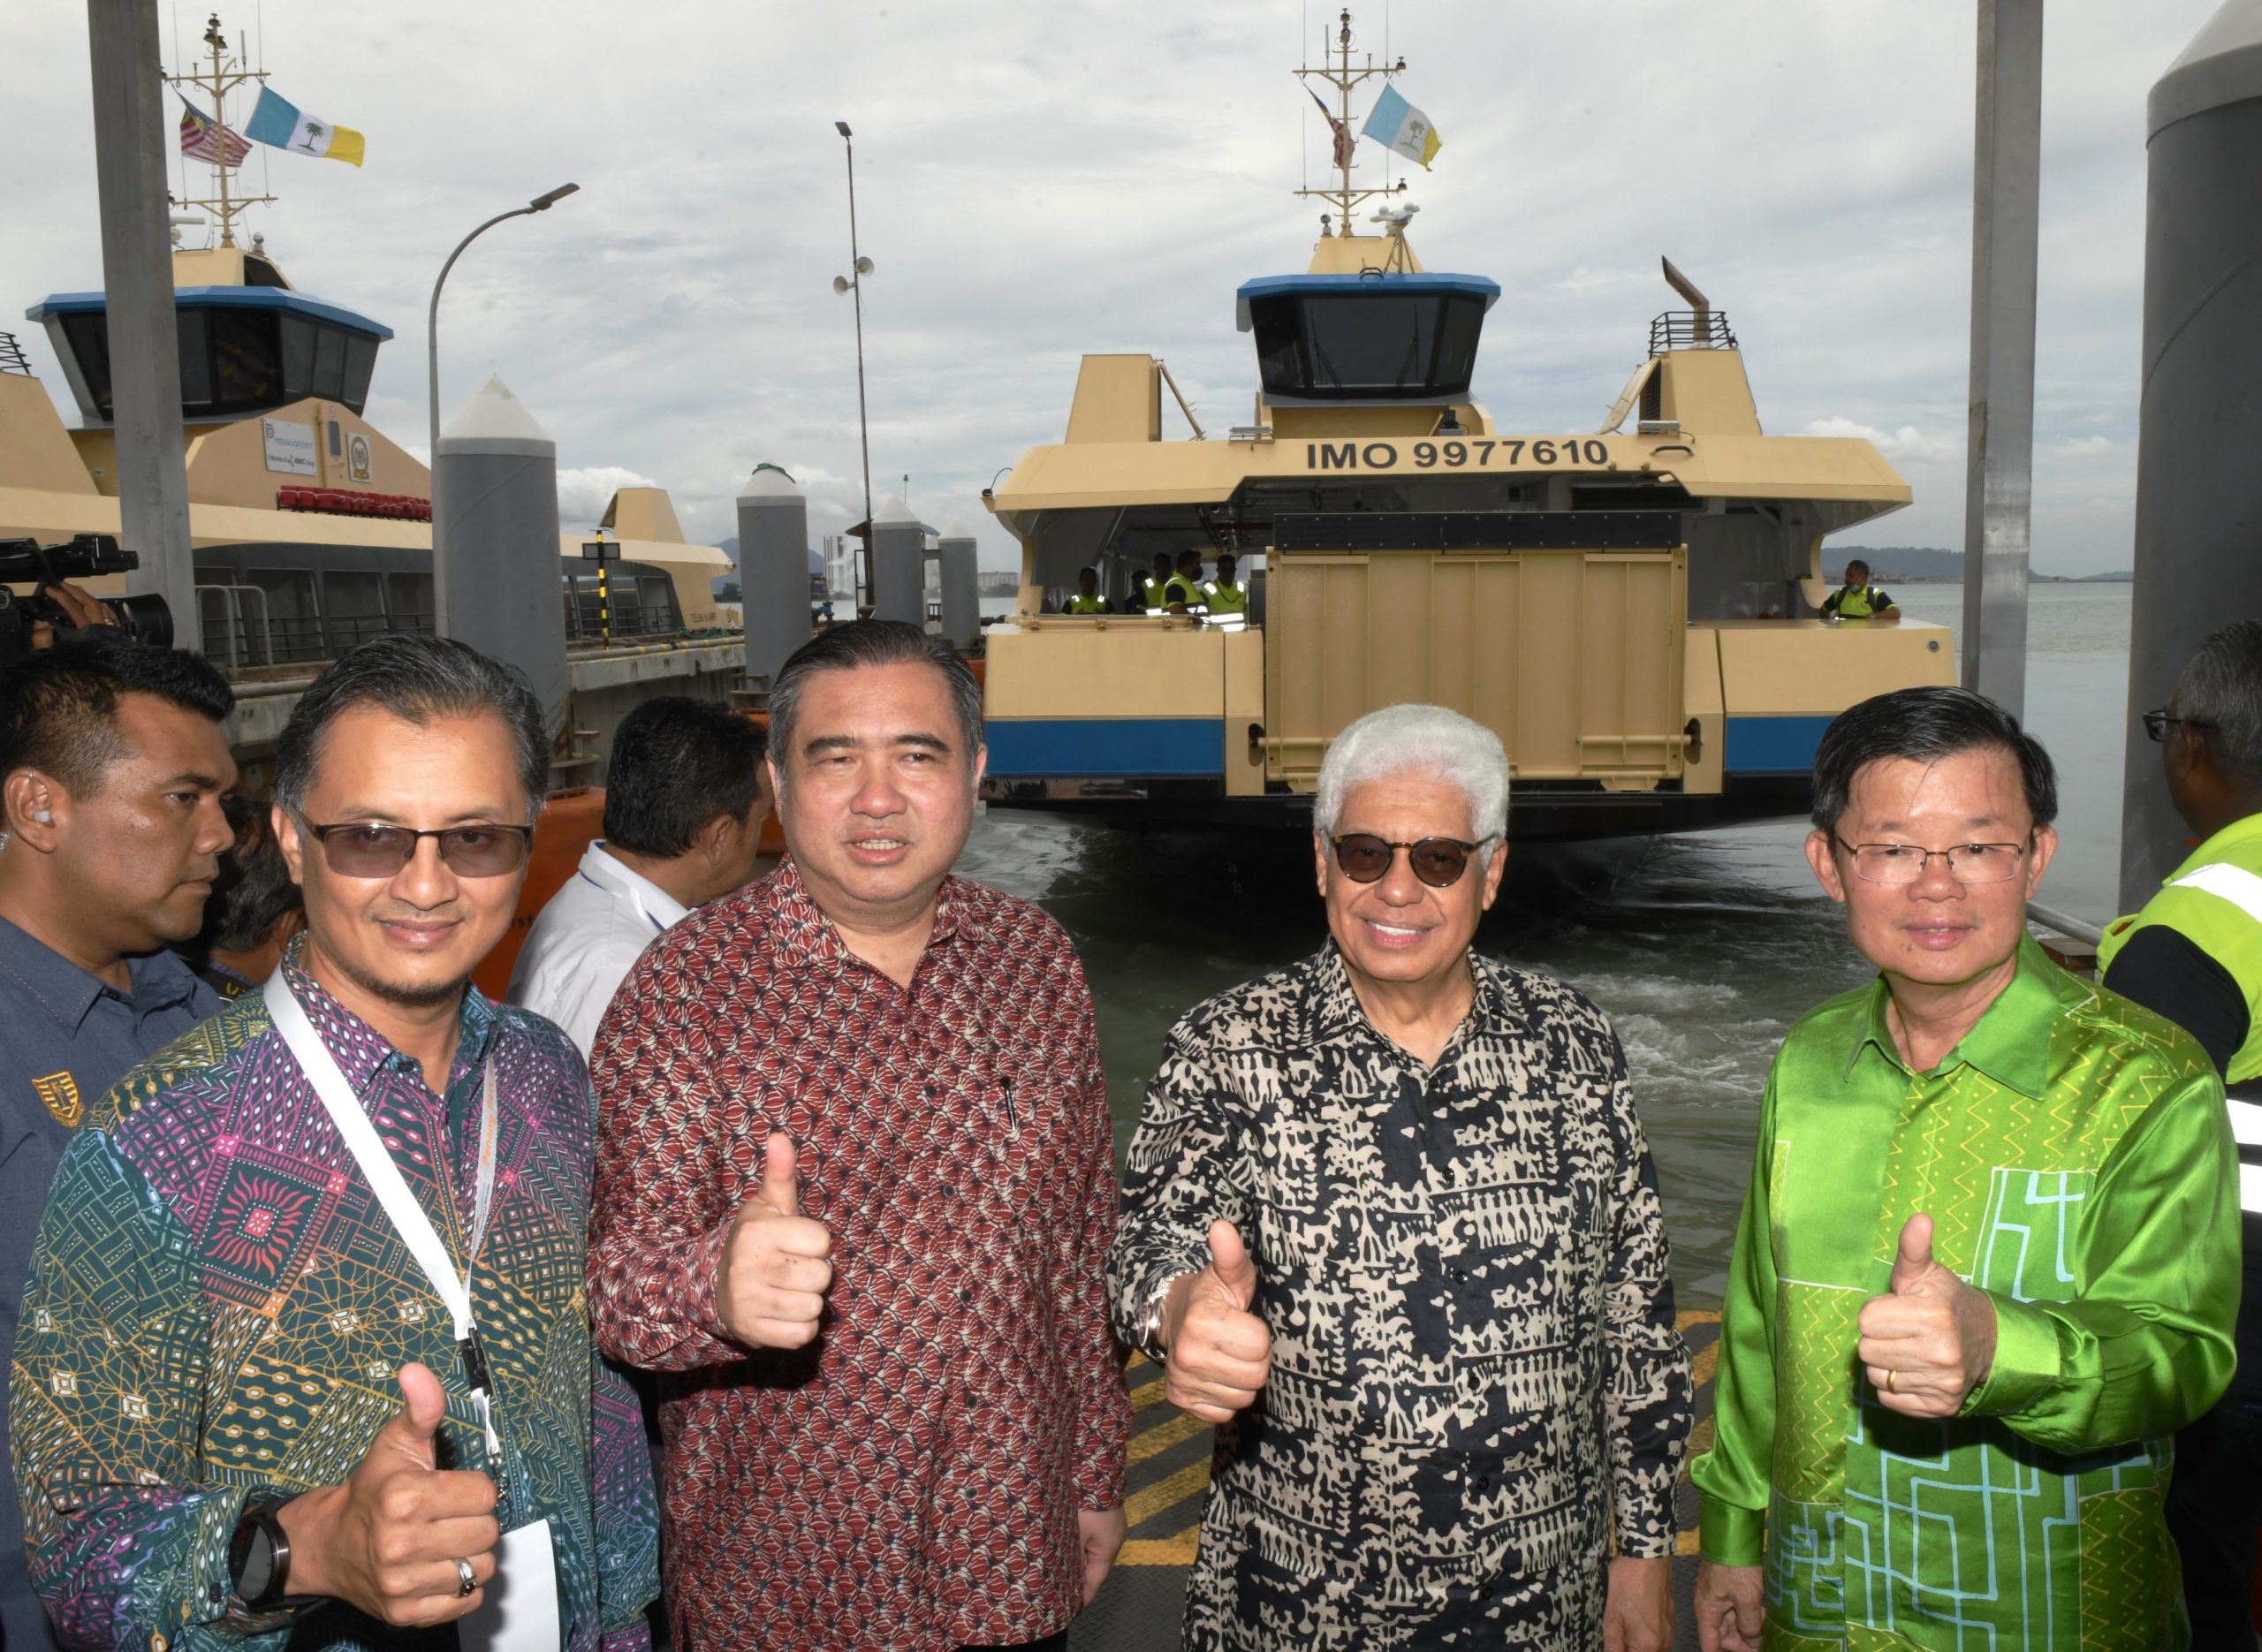 Penang's new ferry can be great tourist attraction: Loke